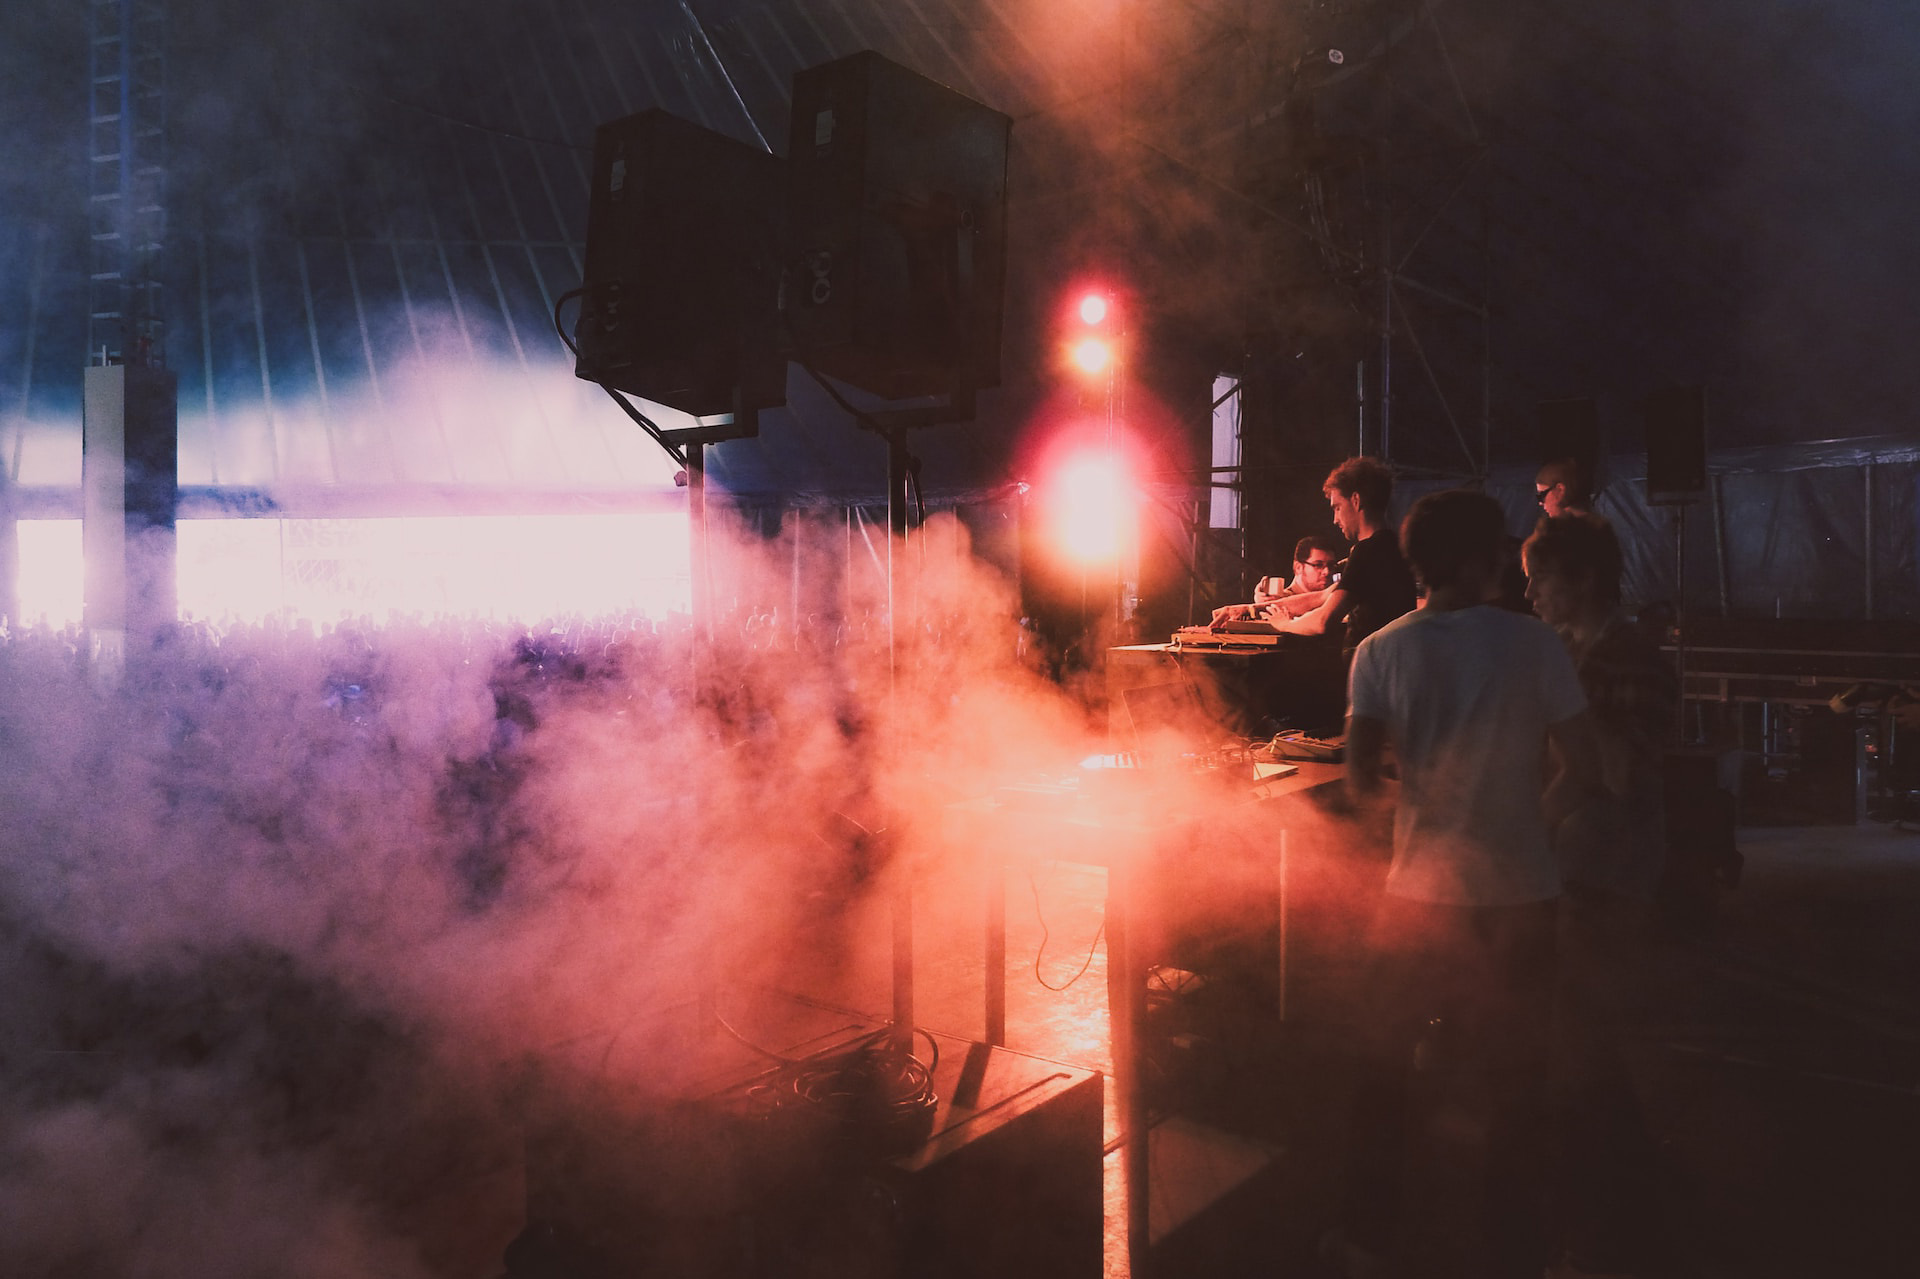 Stage-hands working in a smoky area